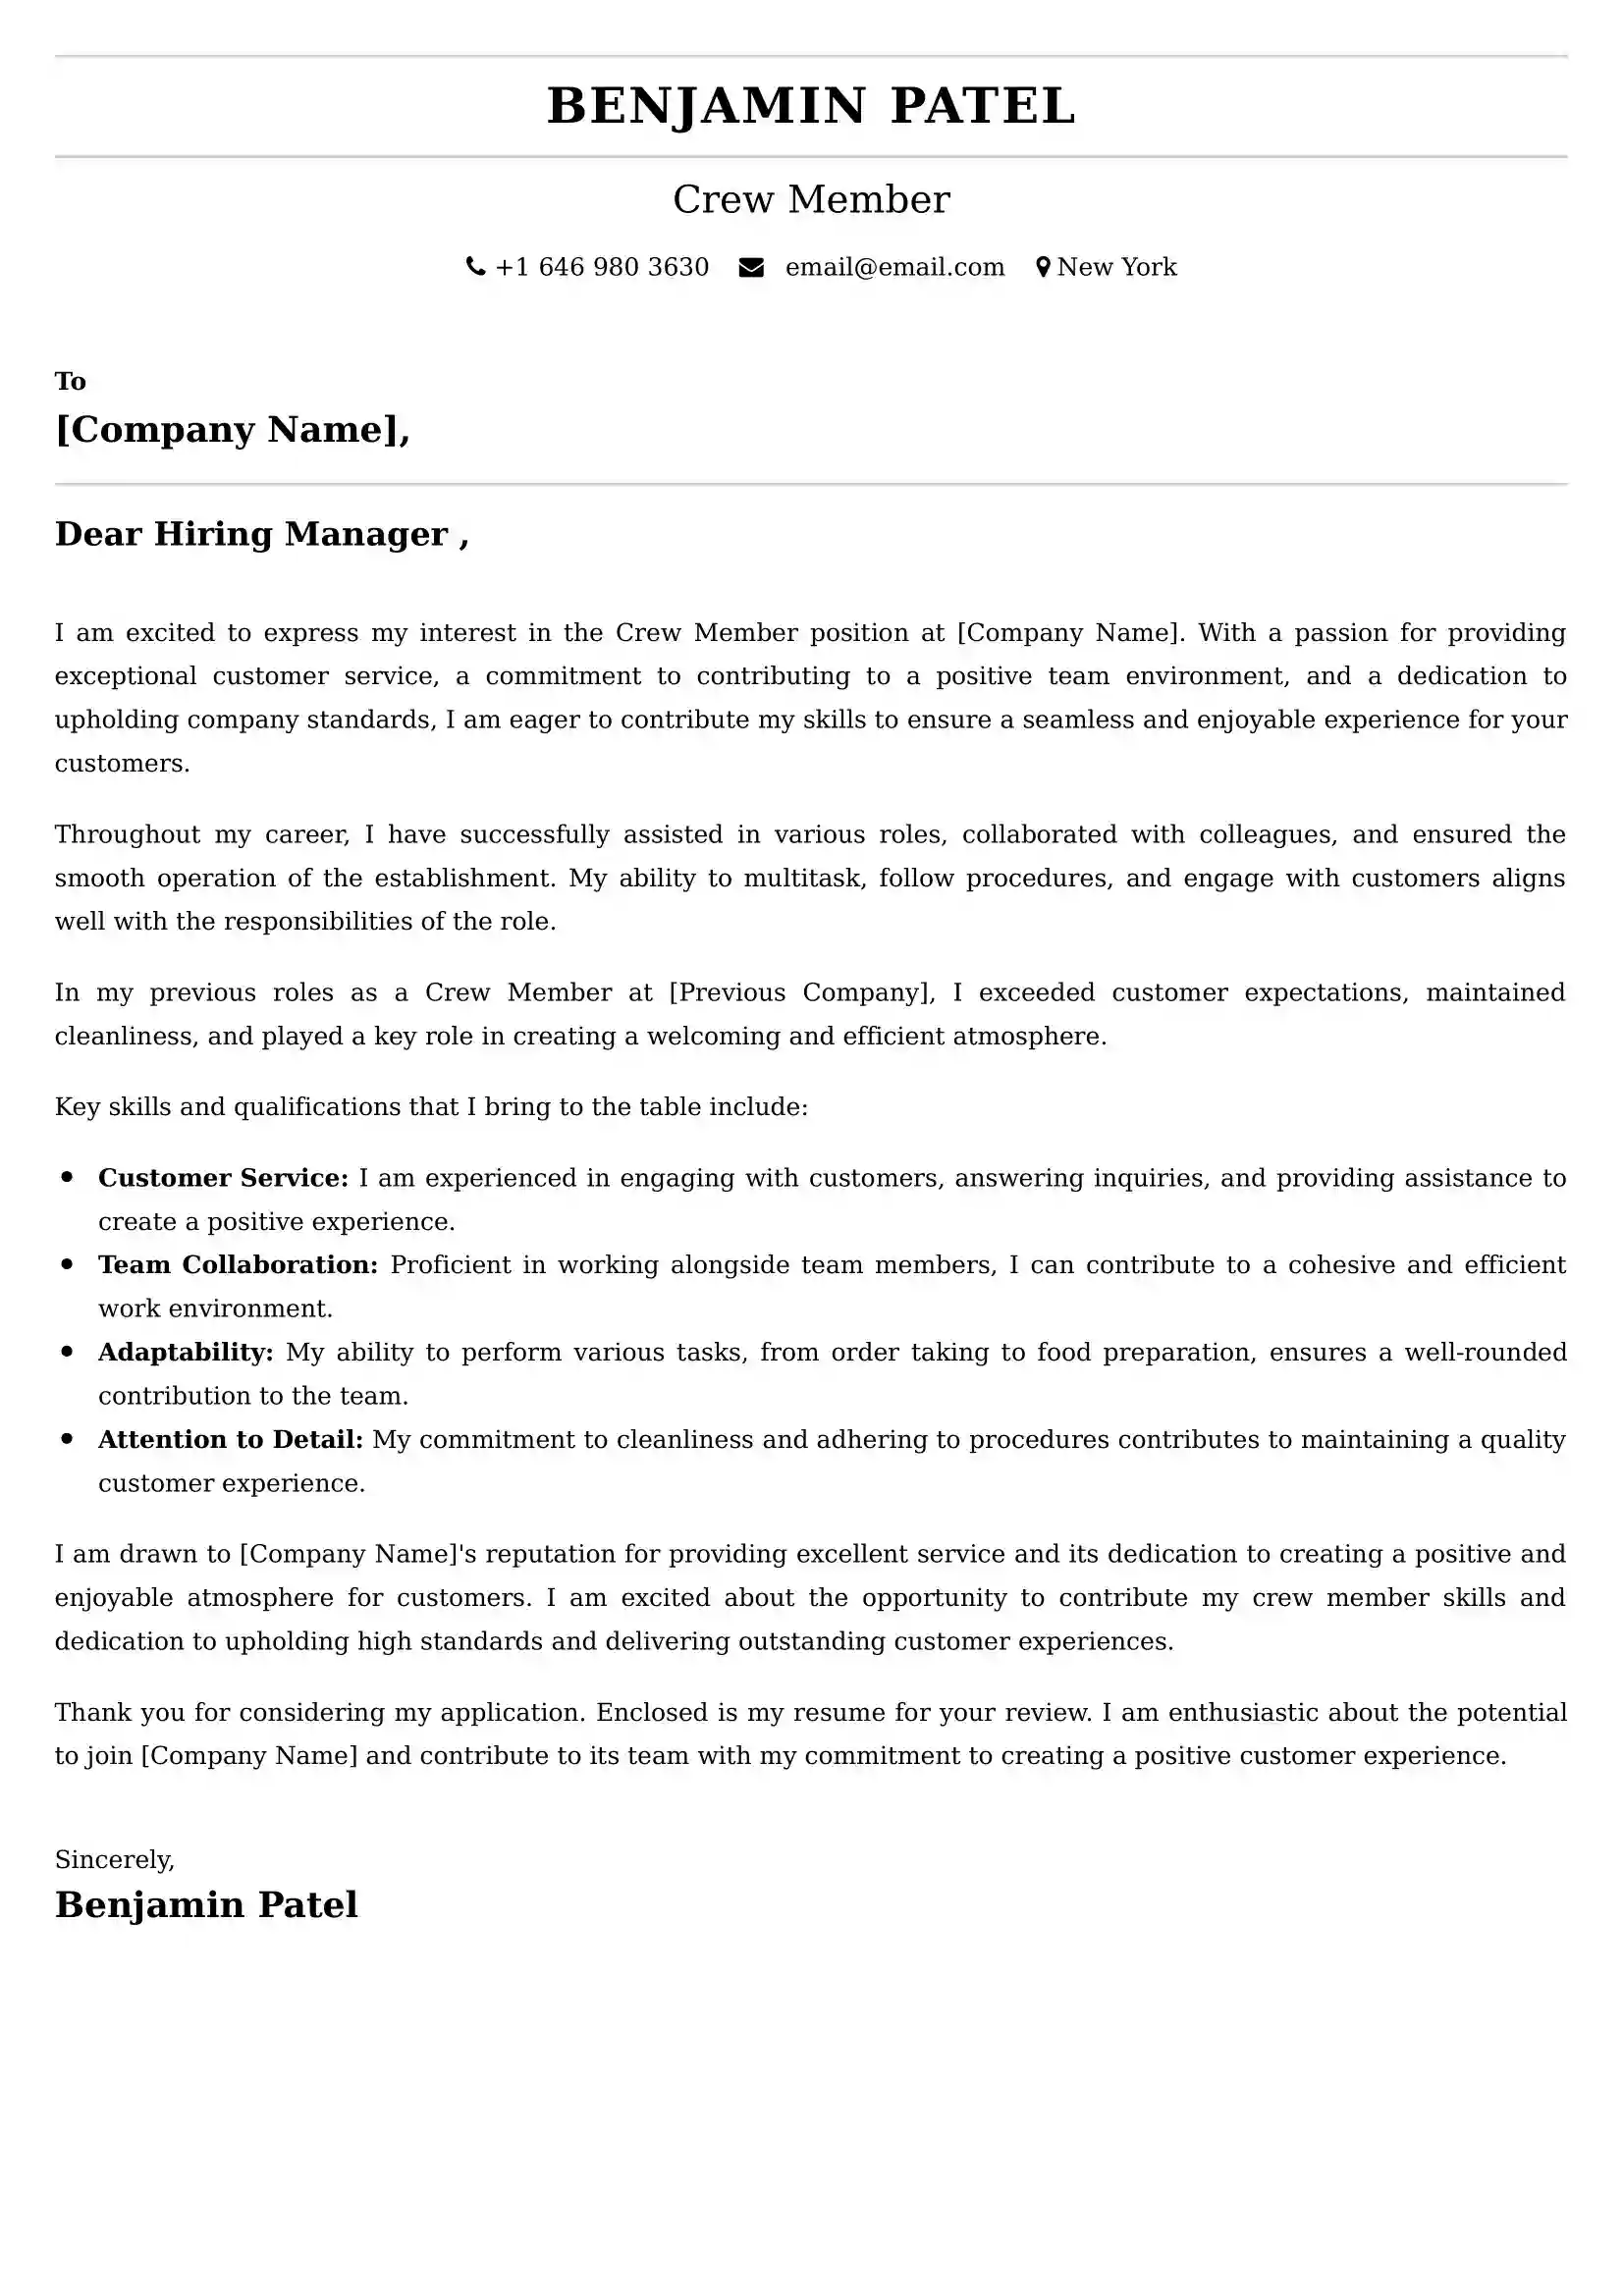 Crew Member Cover Letter Examples - Latest UK Format